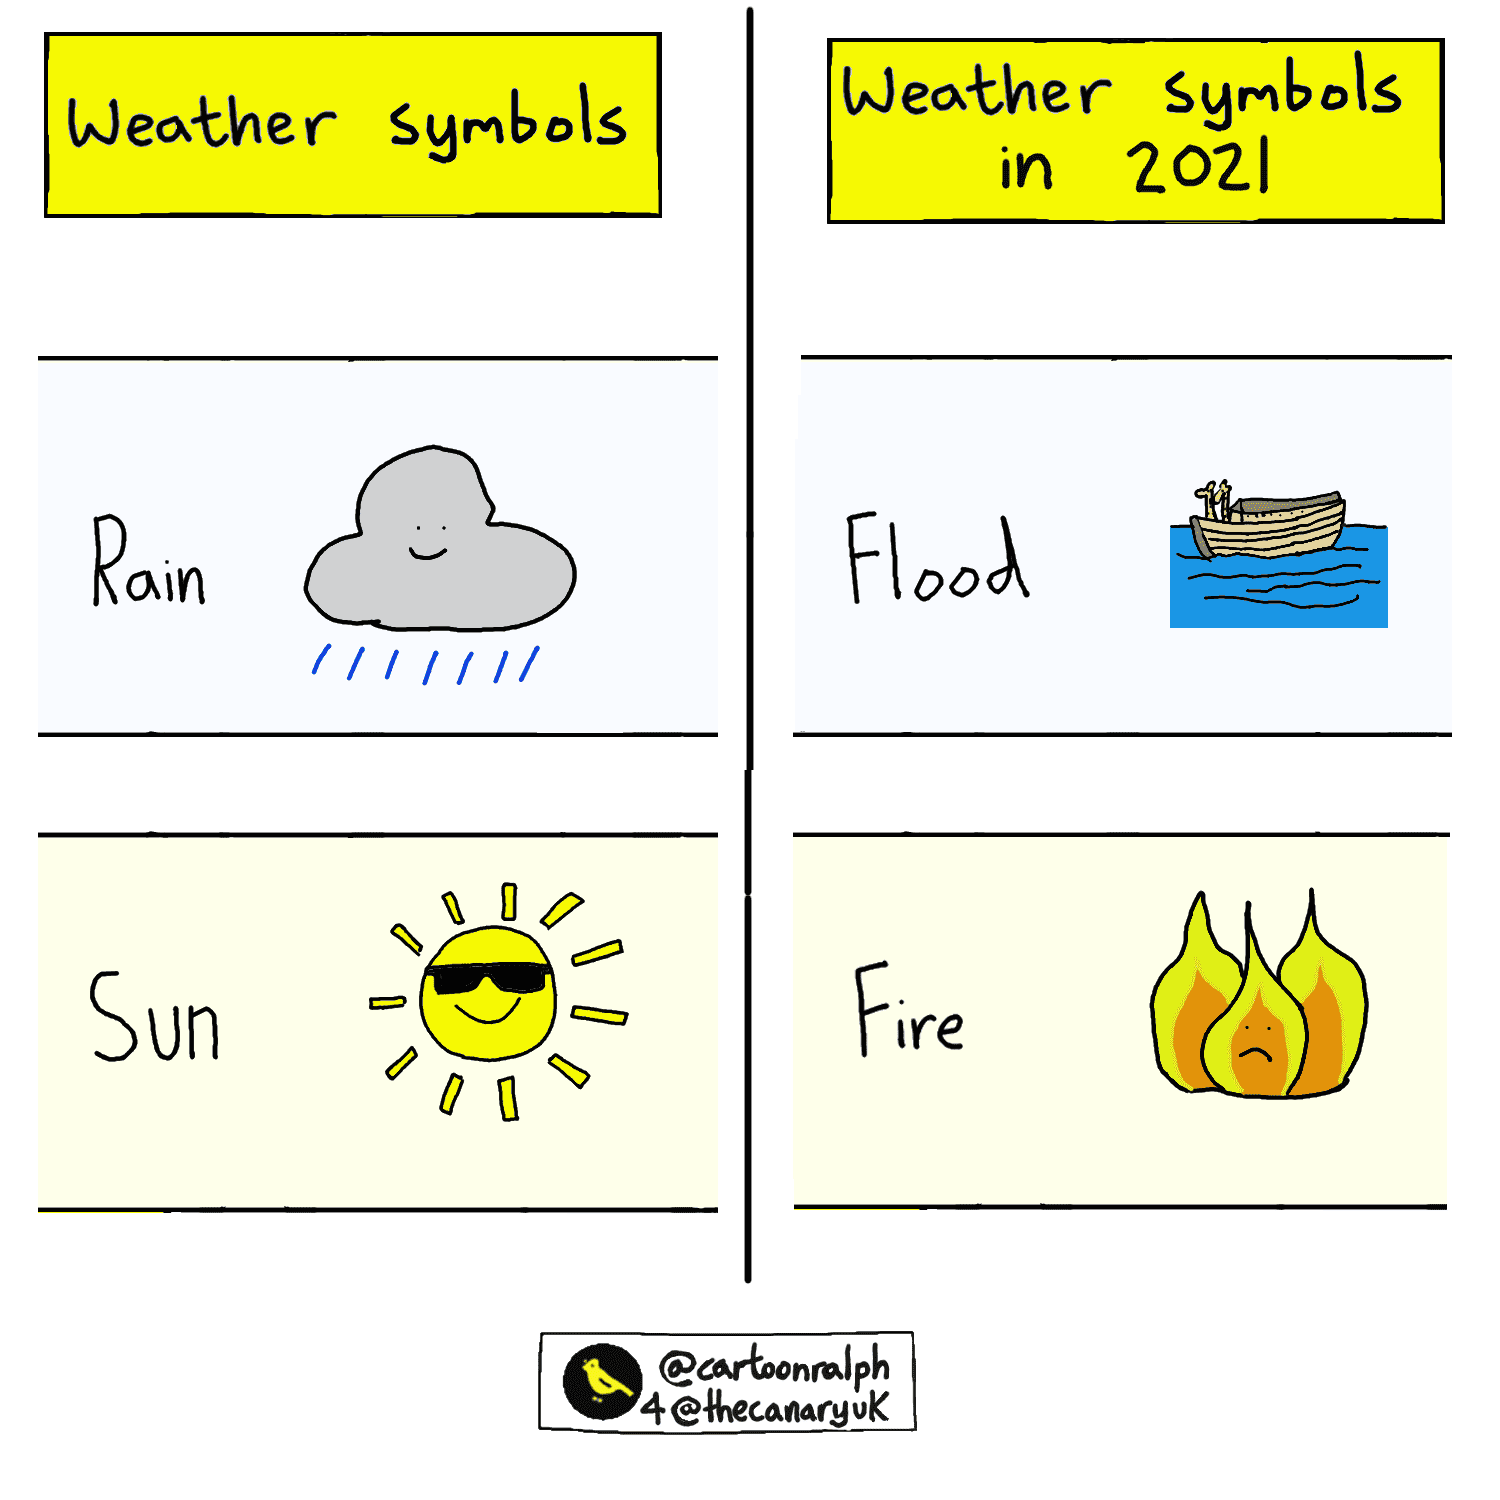 Image comparing weather symbols of the past with the current climate crisis symbols